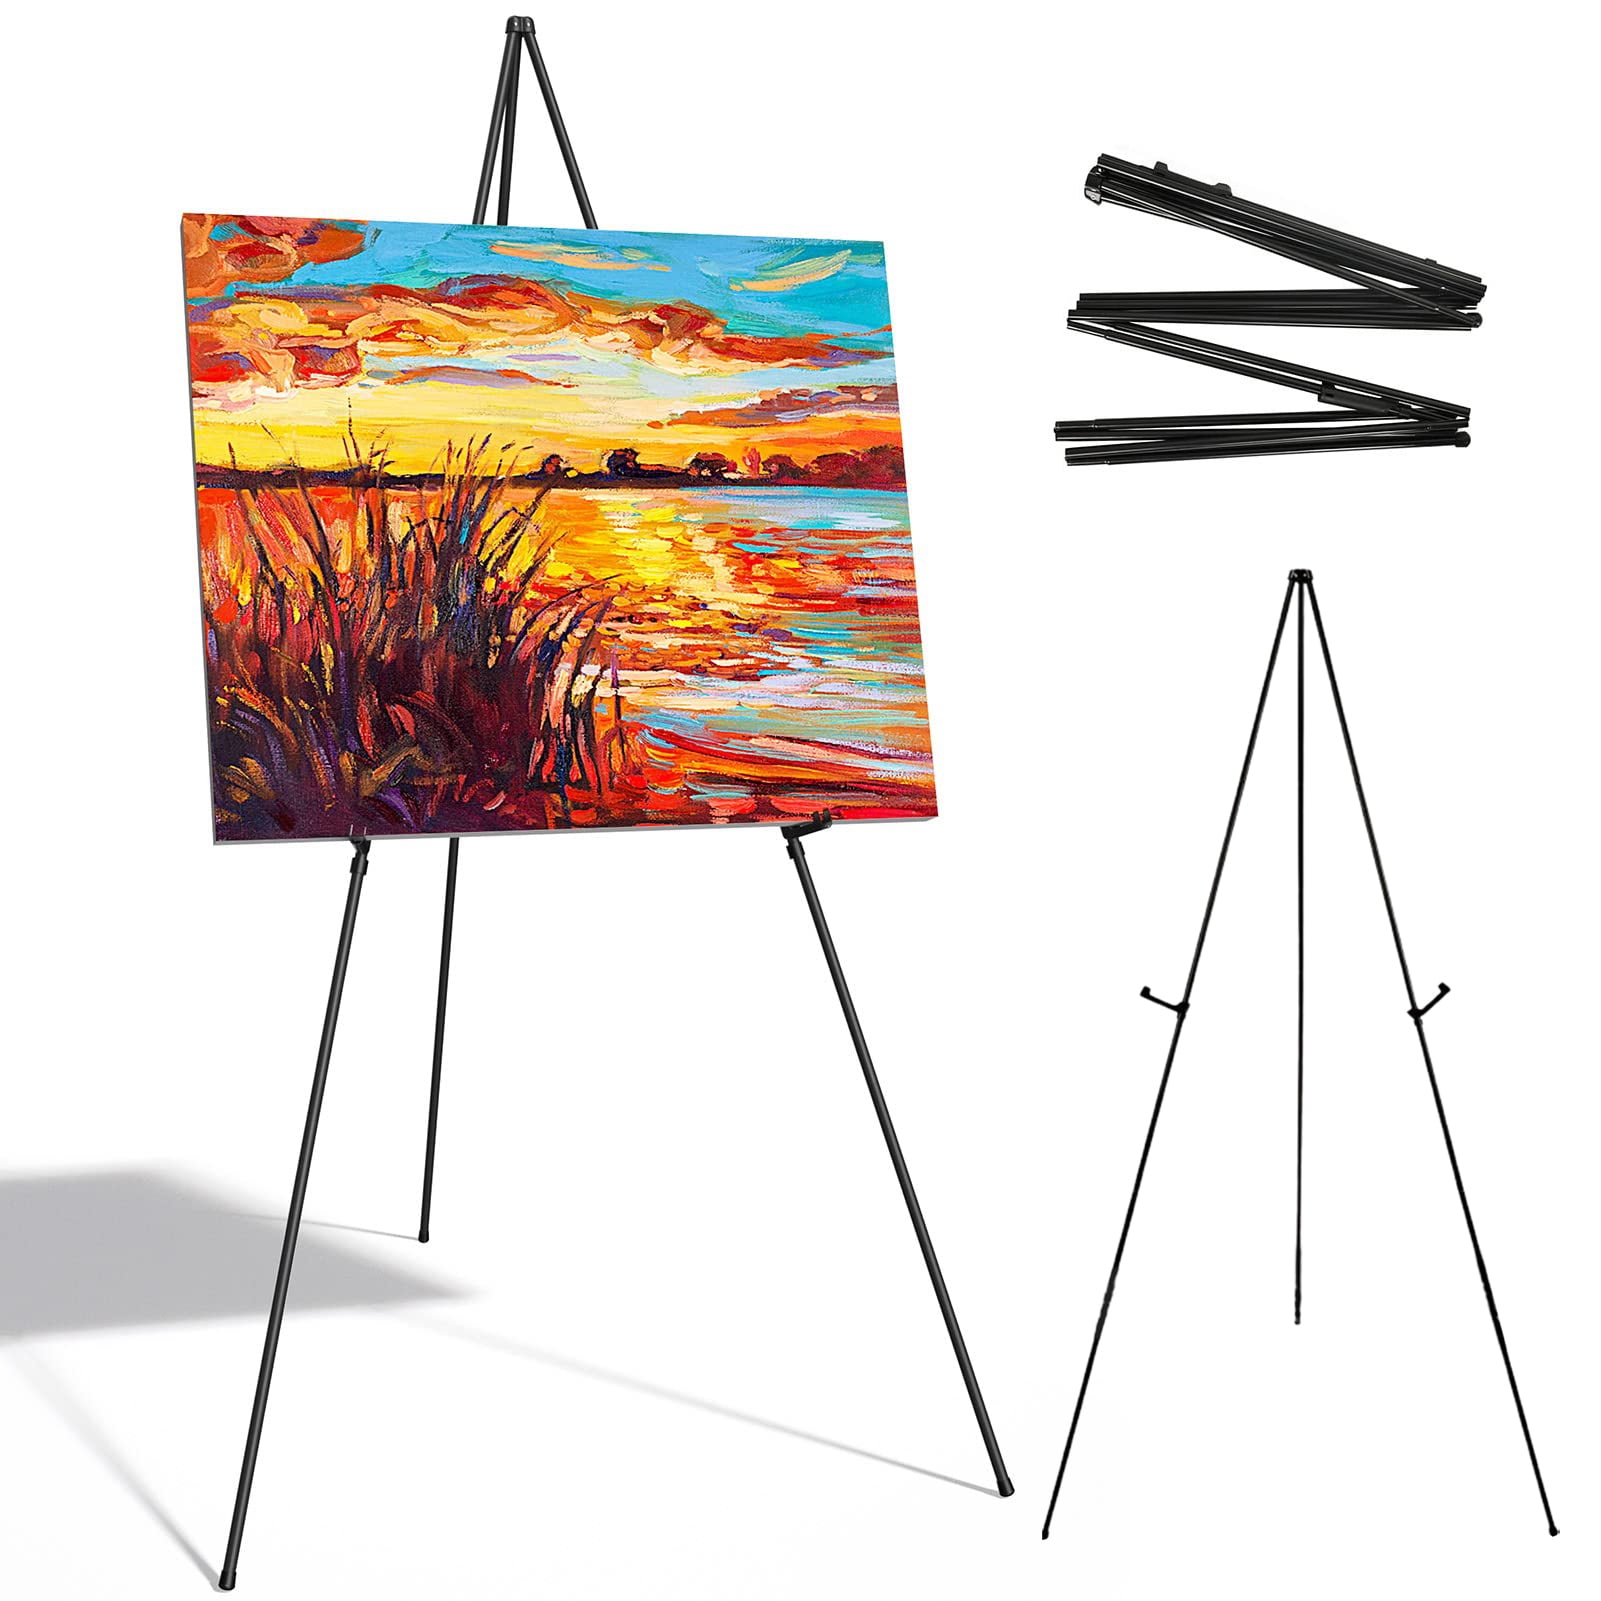 Display Easel Easel Stand Tripod Portable Collapsible Adjustable Height  Painting Art Easel Floor Easel for Display Holder Wedding Signs Home Argent  